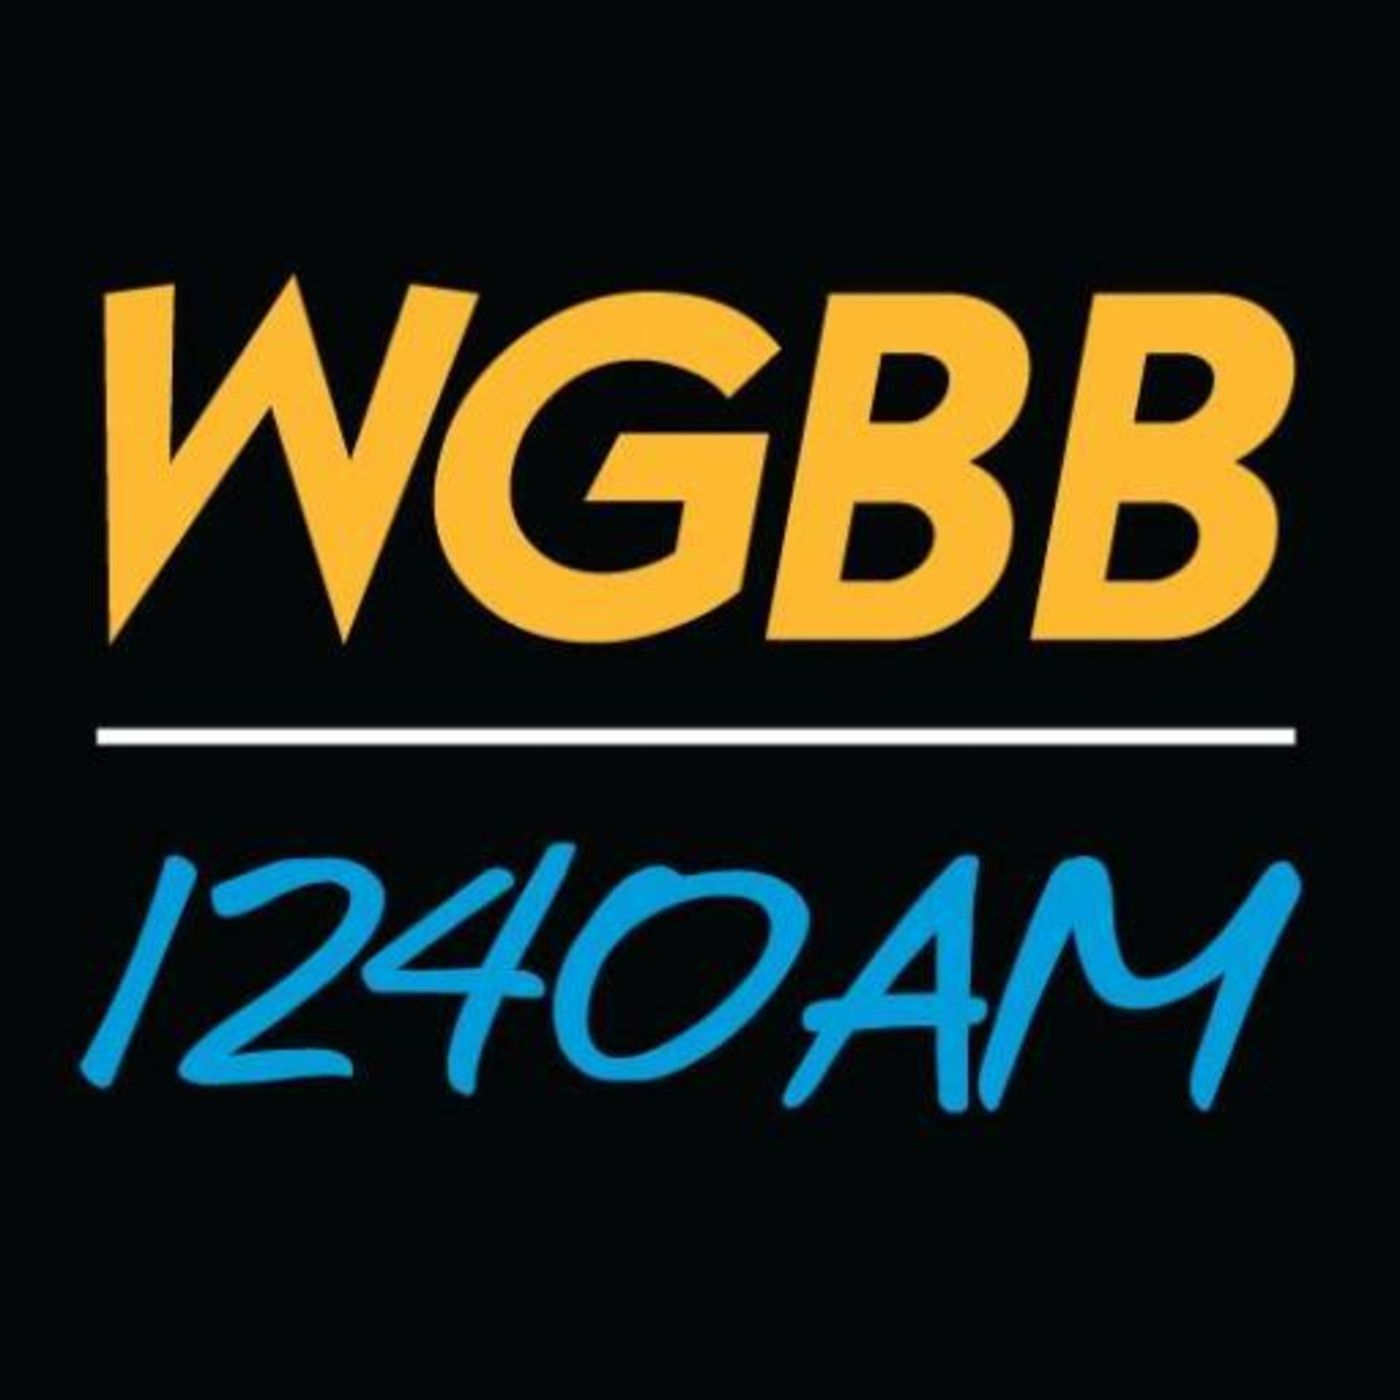 .@LateNightParent comes to @am1240wgbb promo